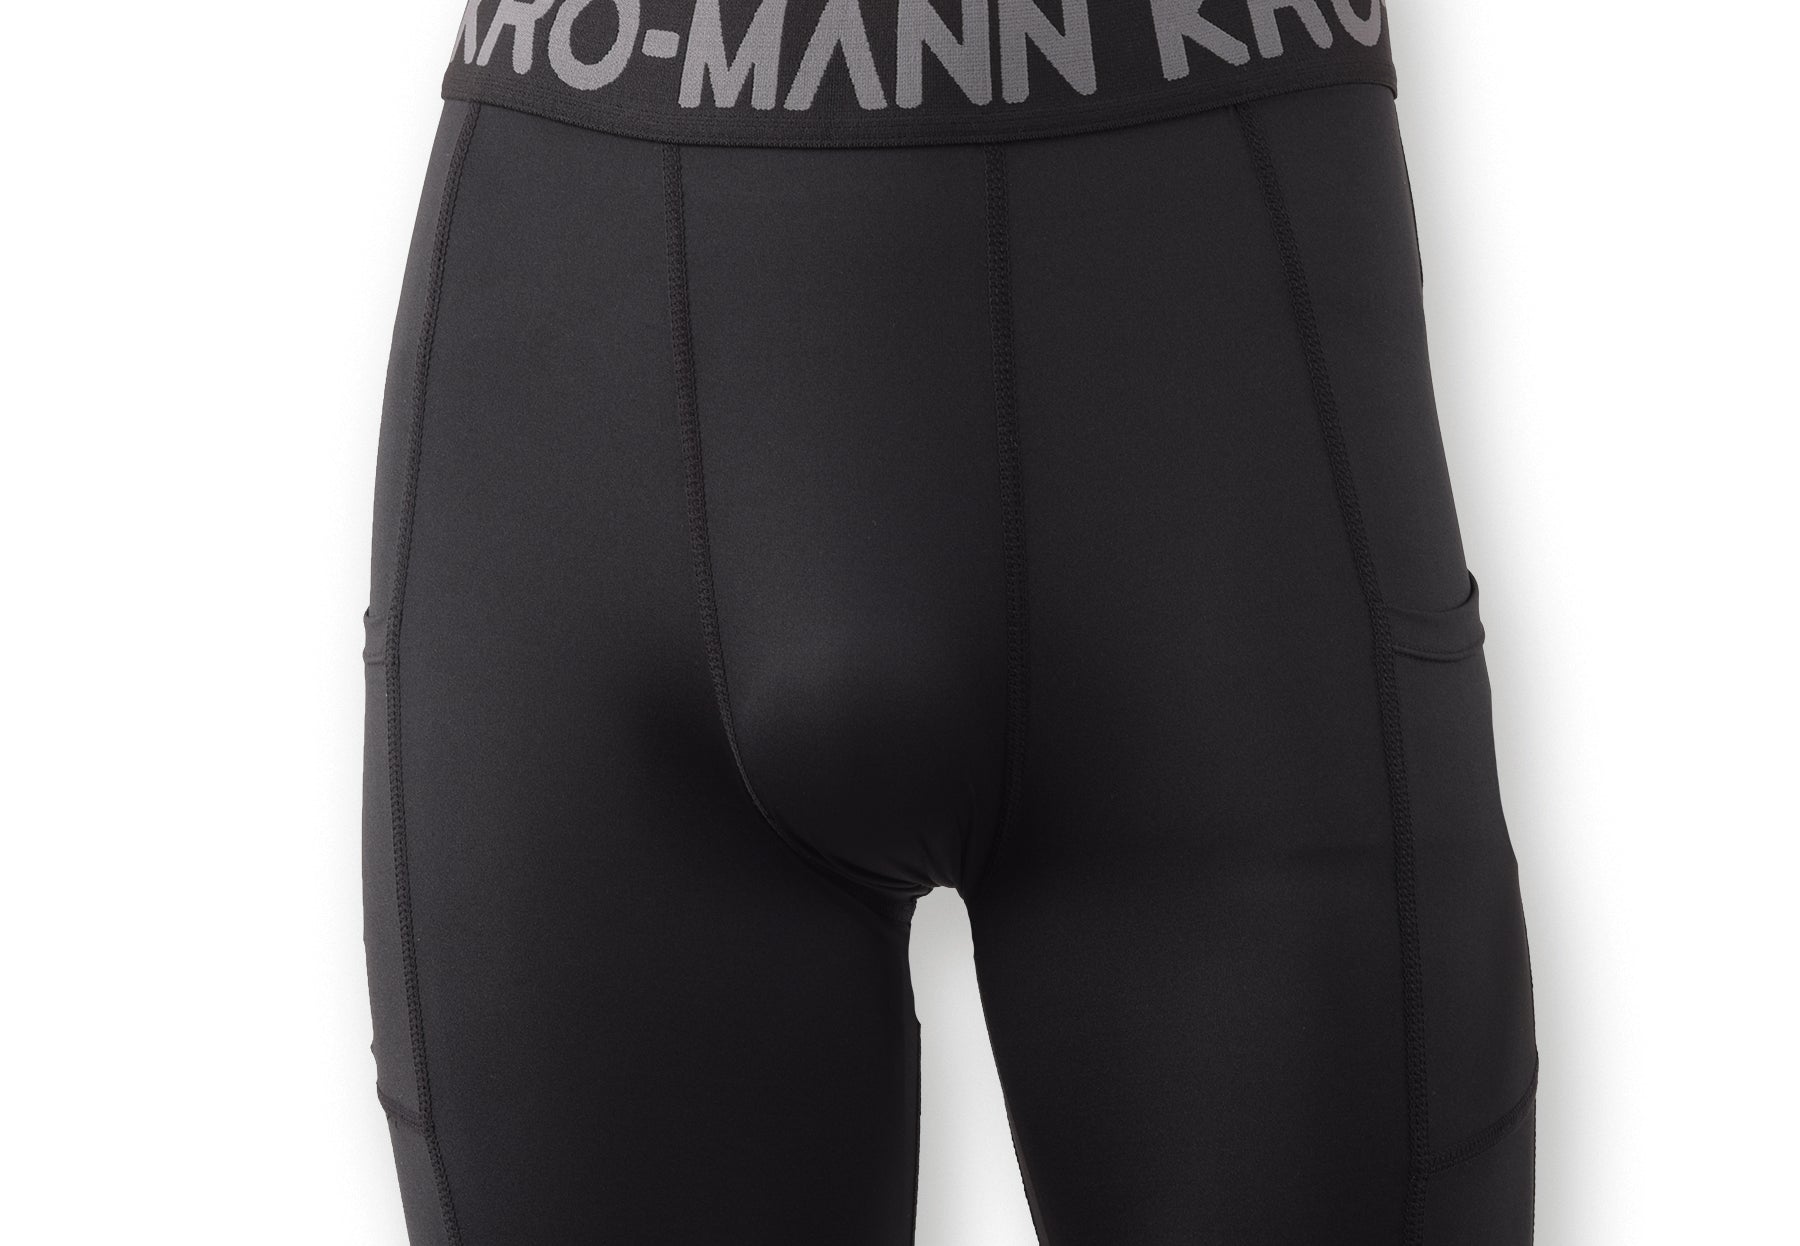 COMPRESSION shorts - YantraConnection